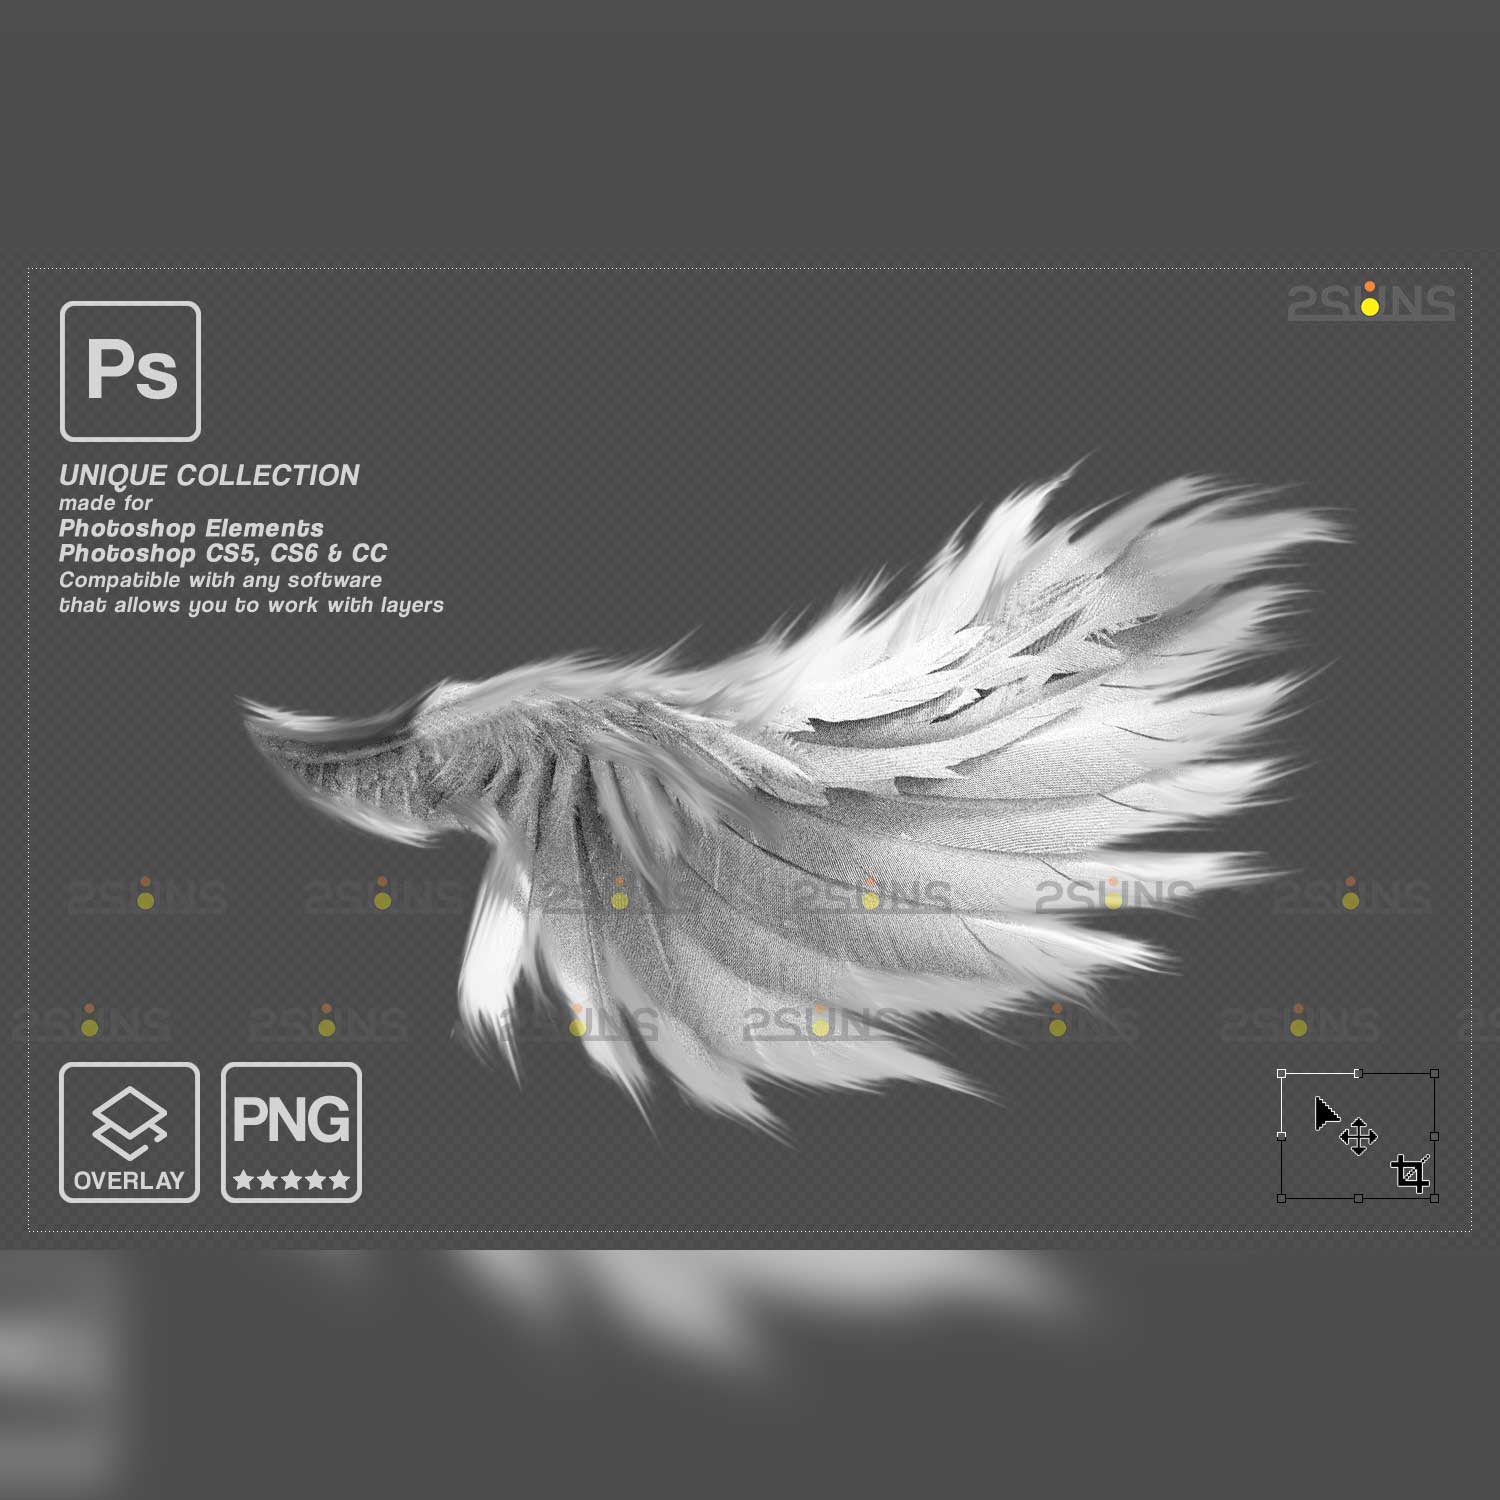 Realistic White Angel Wings Photoshop Overlays white wing example.